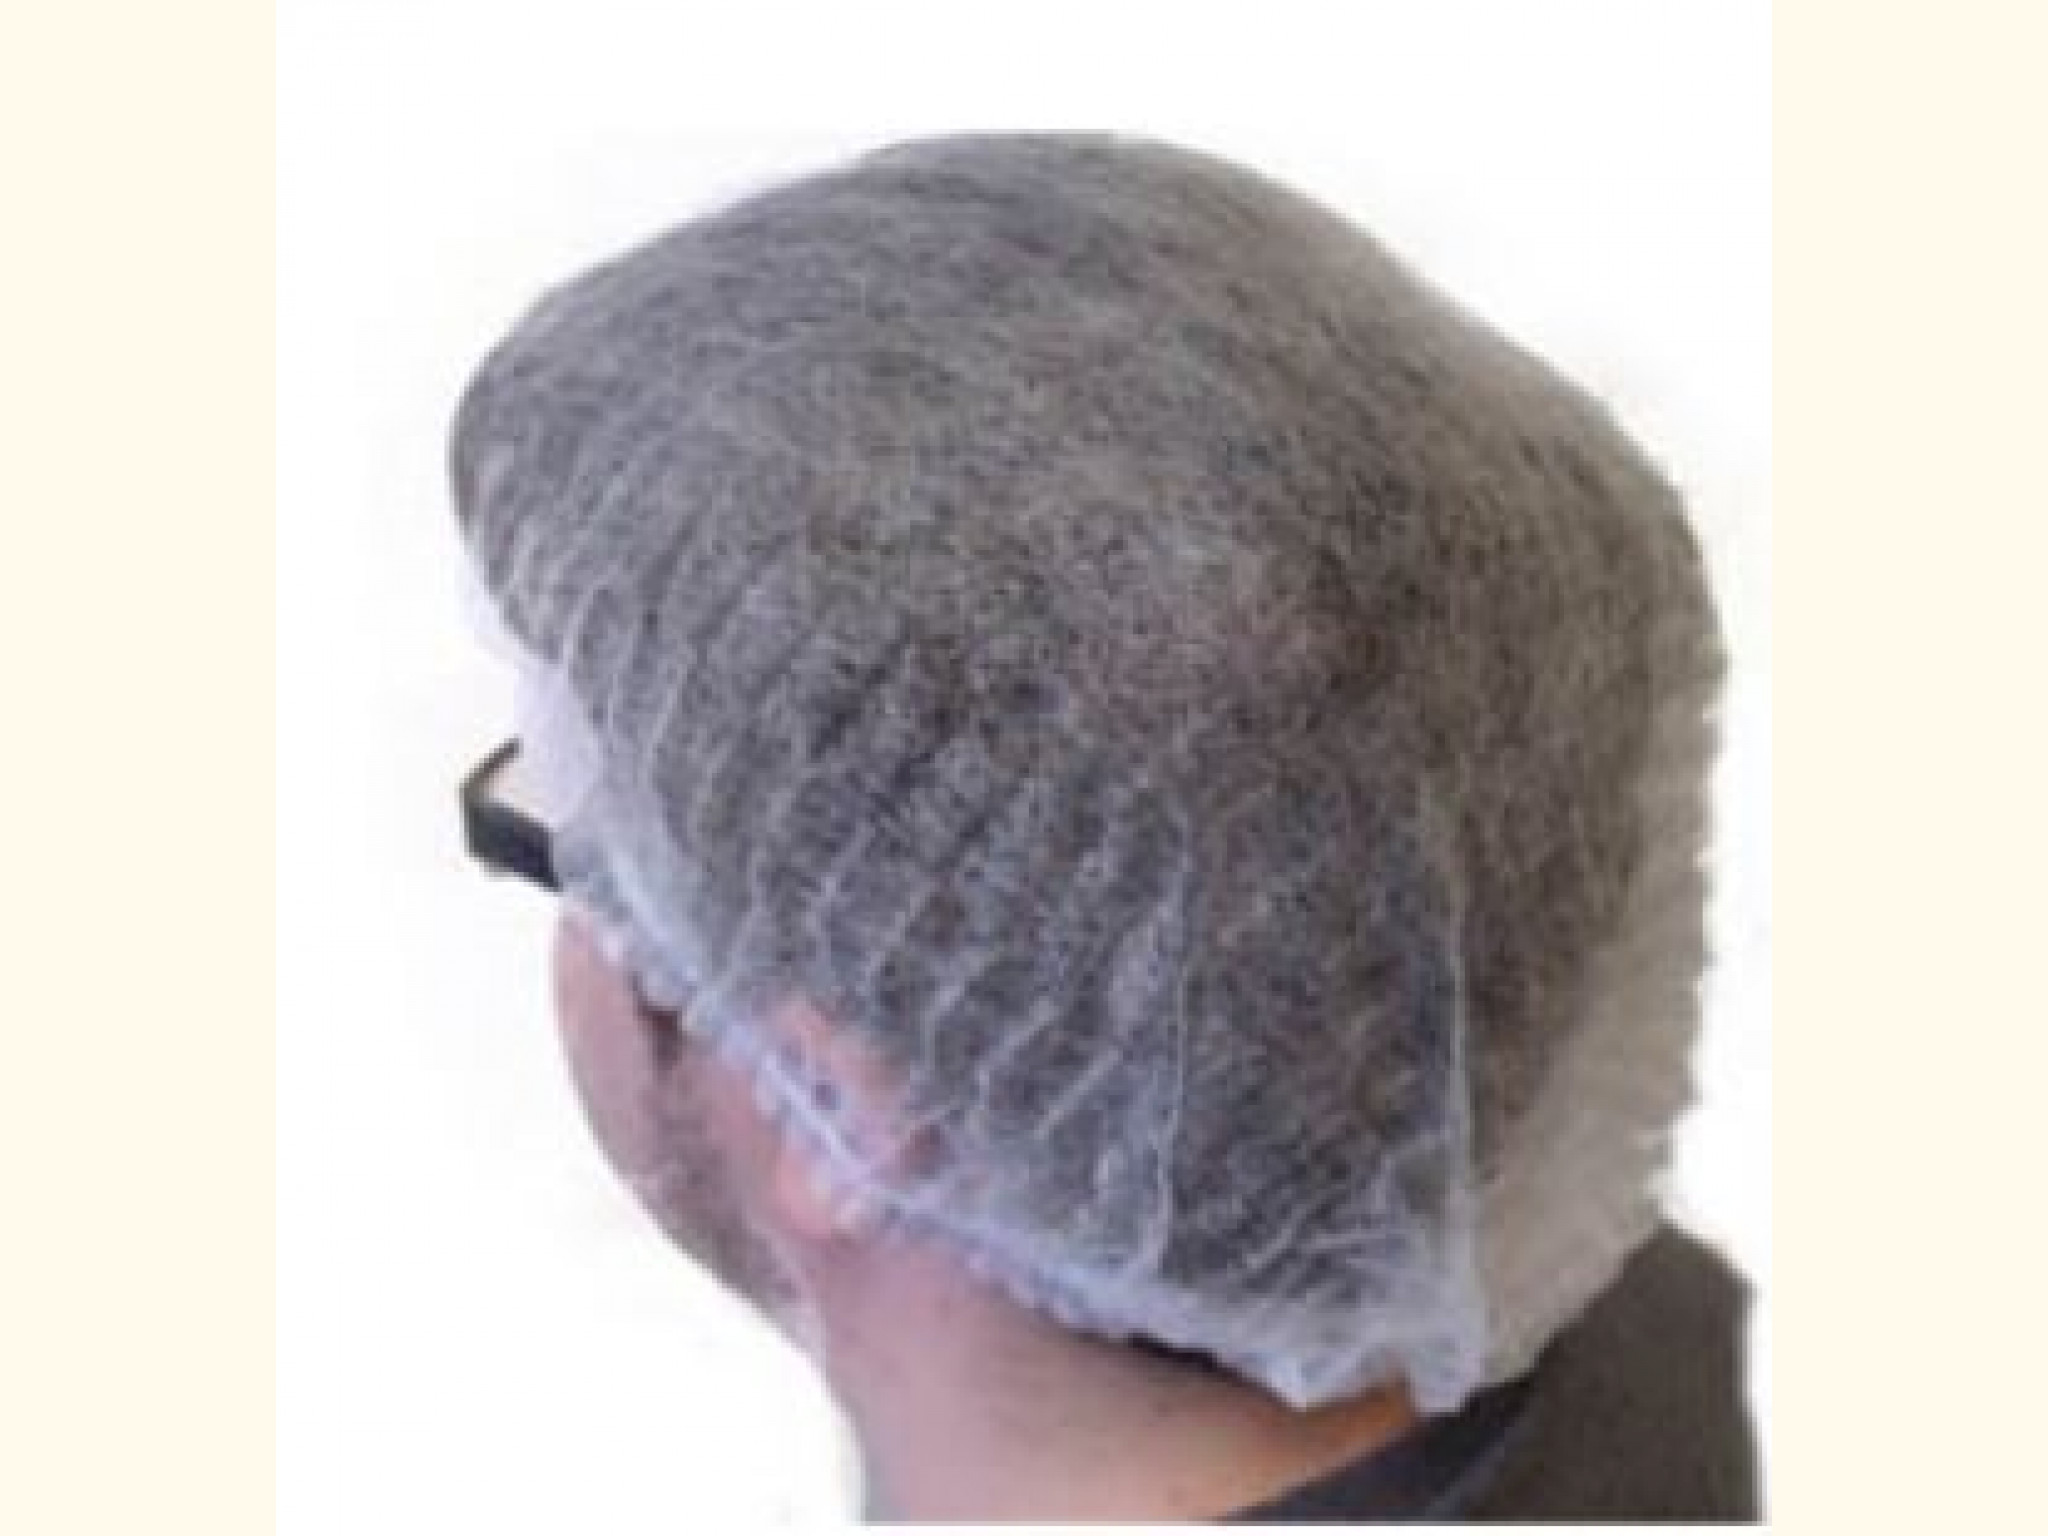 Blue Medical Hair Net - Prevents Contamination and Keeps Hair in Place - wide 2